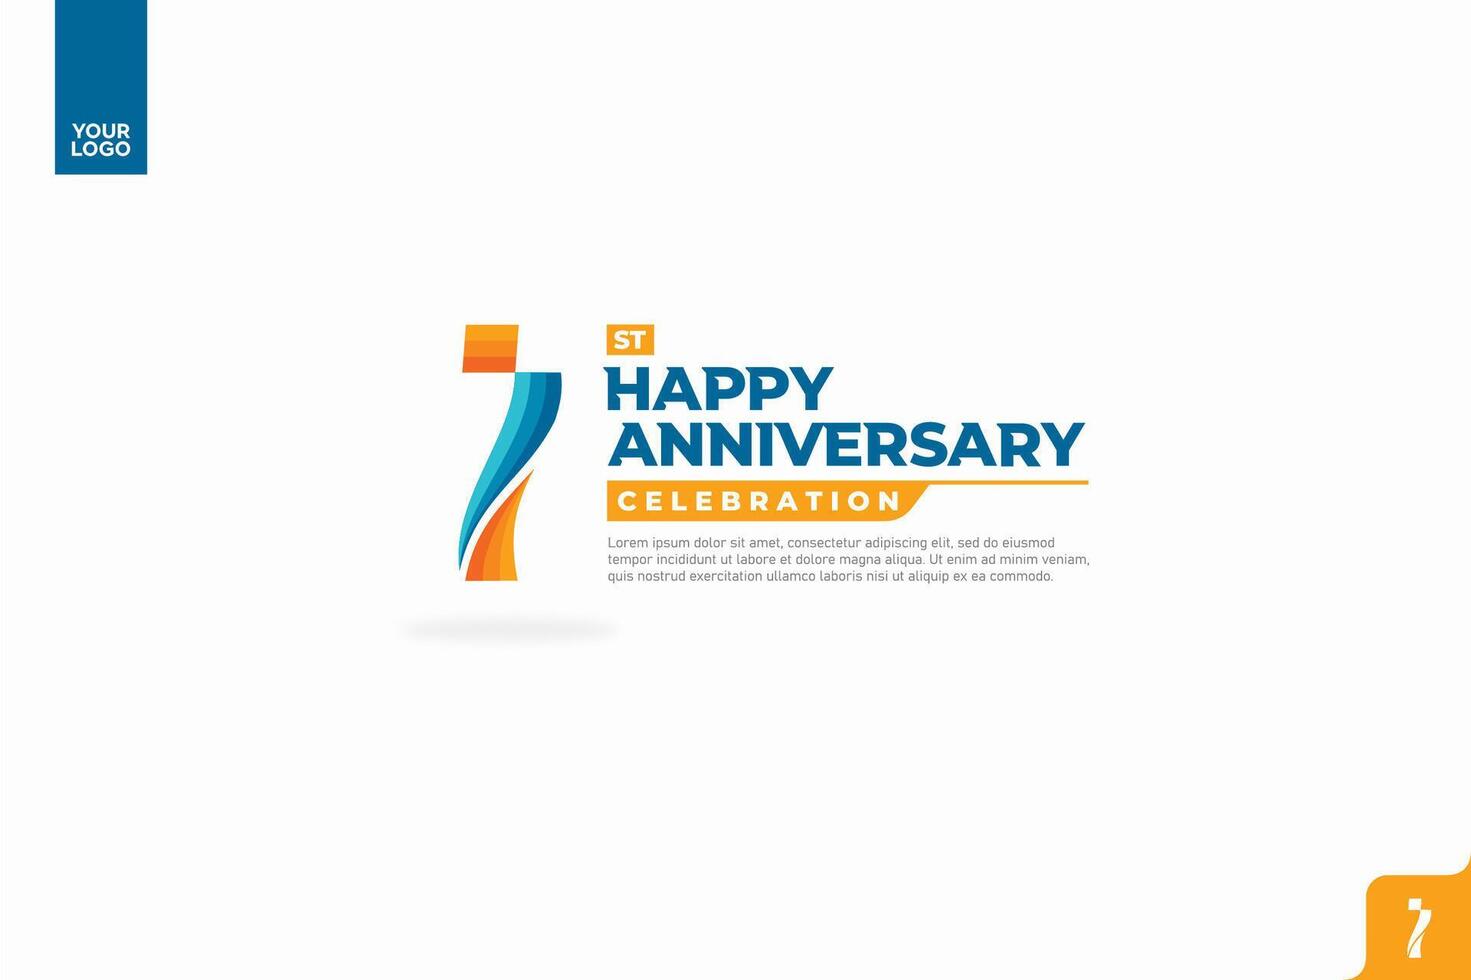 1st happy anniversary celebration with orange and turquoise gradations on white background vector